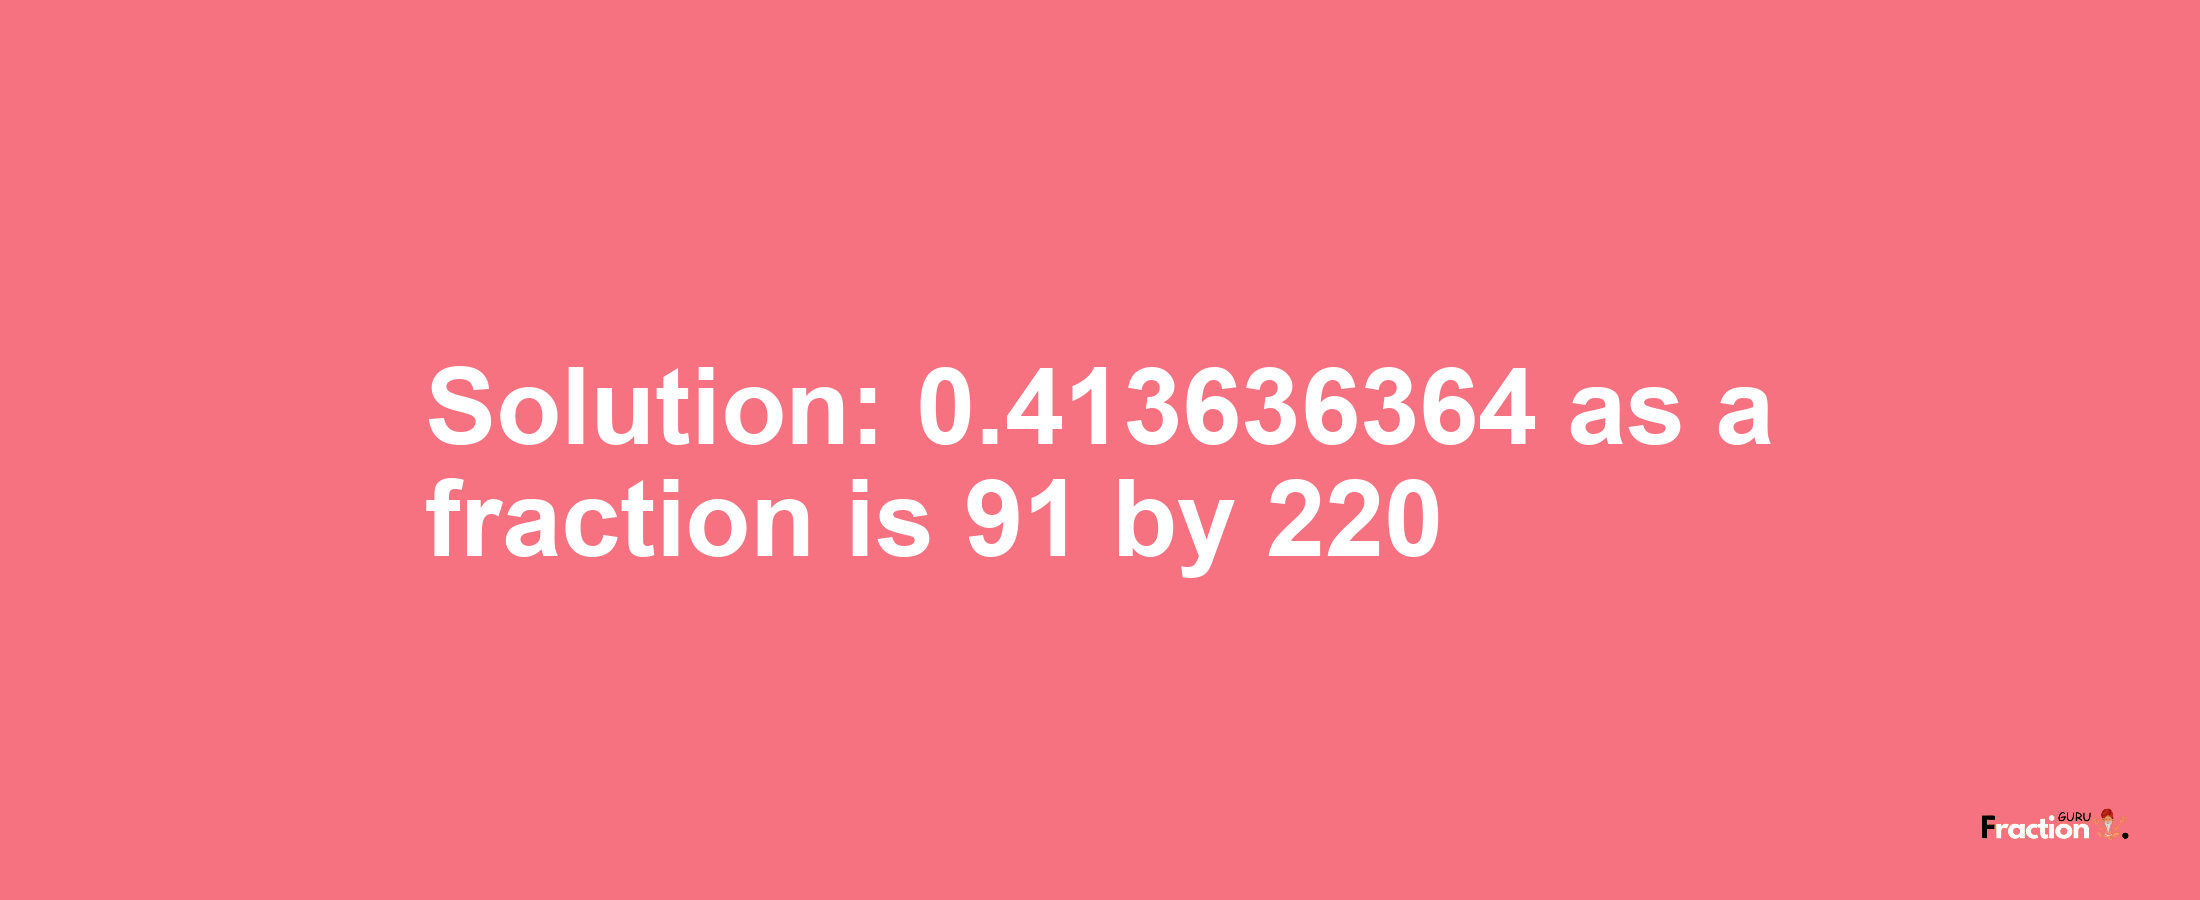 Solution:0.413636364 as a fraction is 91/220